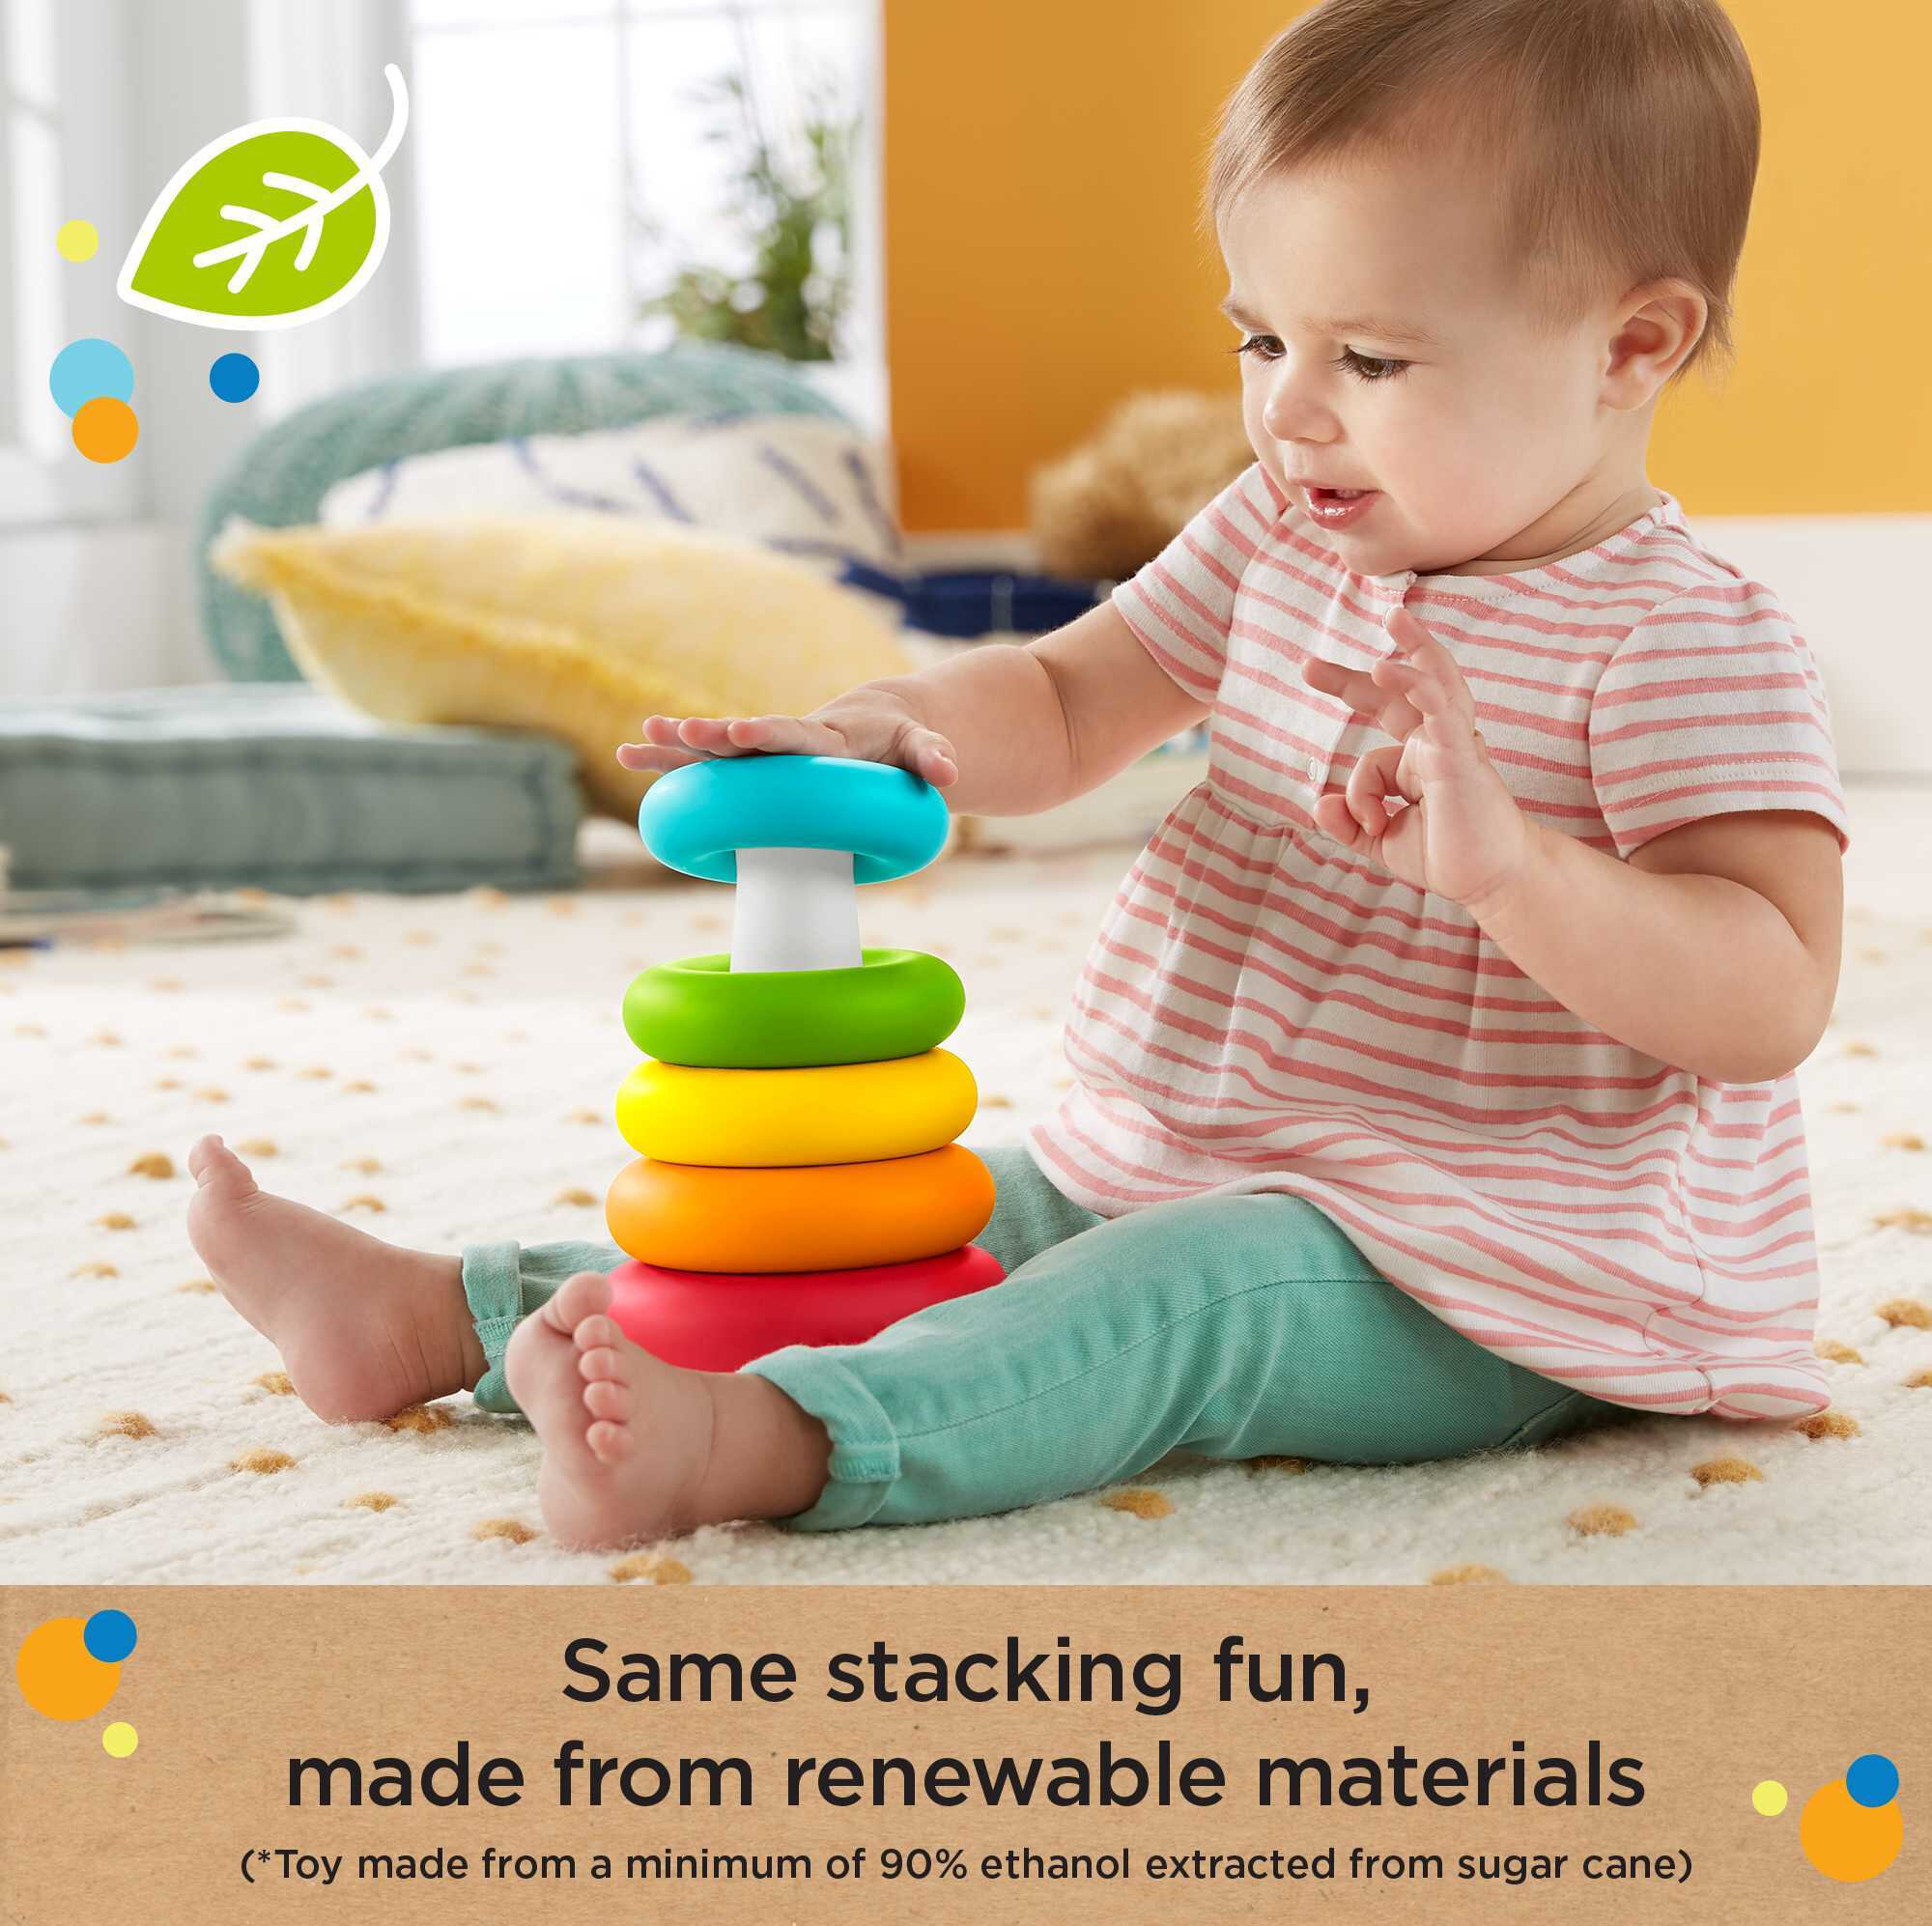 Fisher-Price Baby’s First Blocks & Rock-a-Stack Infant Toy Gift Set Made From Plant-Based Materials - image 4 of 6